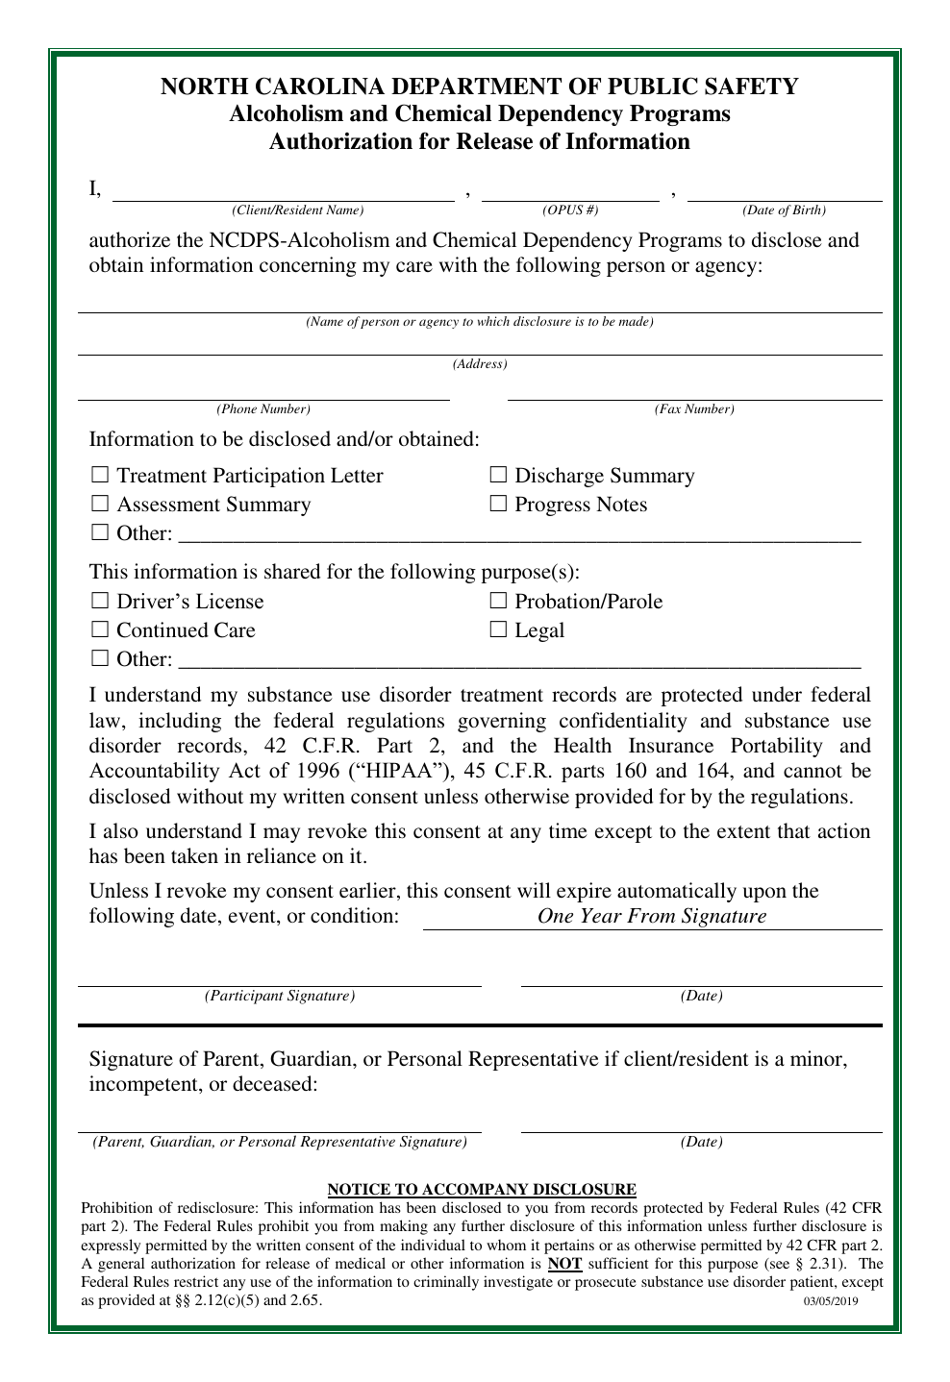 Alcoholism and Chemical Dependency Programs Authorization for Release of Information - North Carolina, Page 1